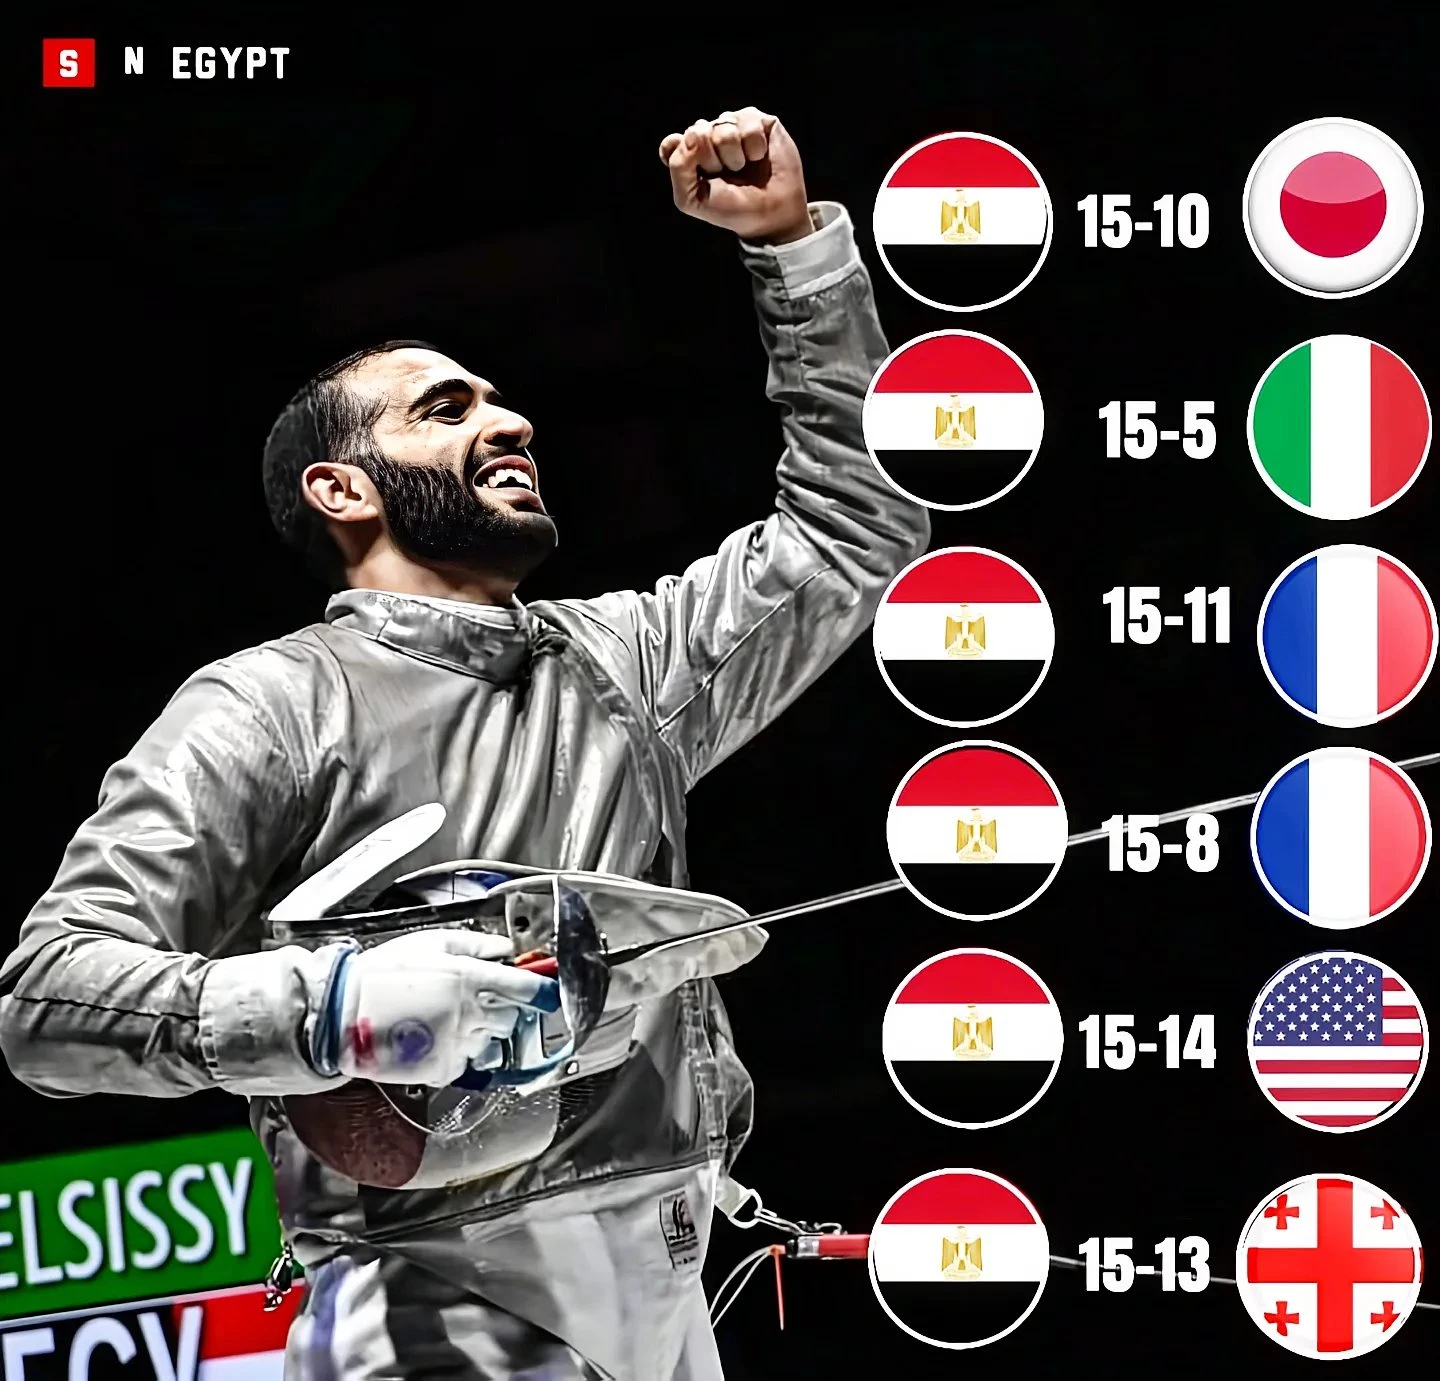 Ziad El-Sisi, the son of the Academy, achieves a historic gold for Egypt in the Grand Prix of the sword tournament in Korea